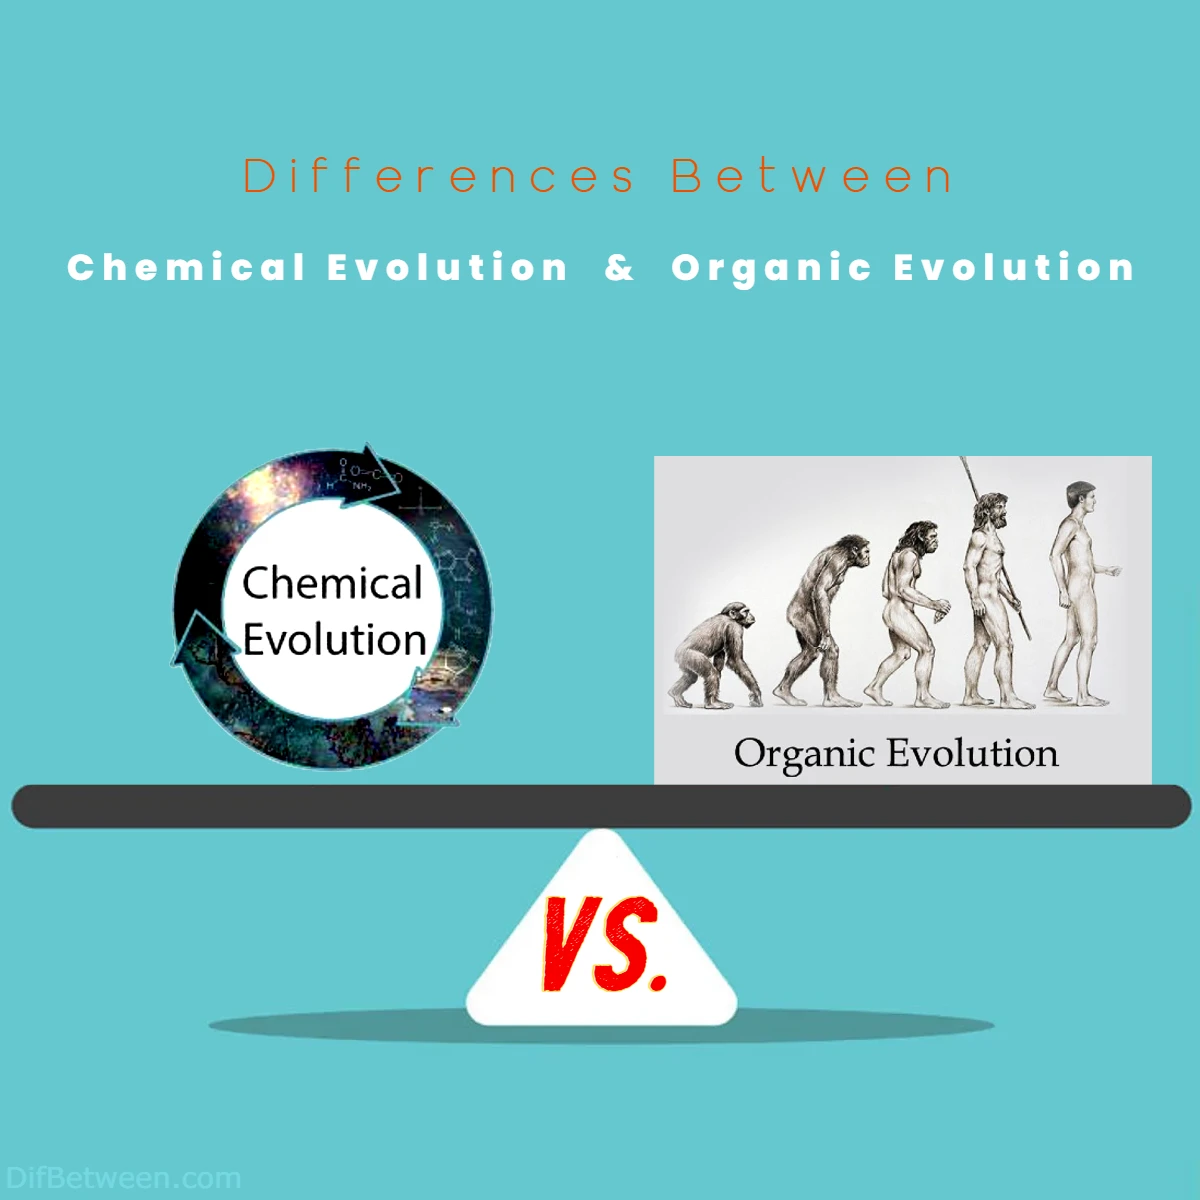 Differences Between Chemical vs Organic Evolution